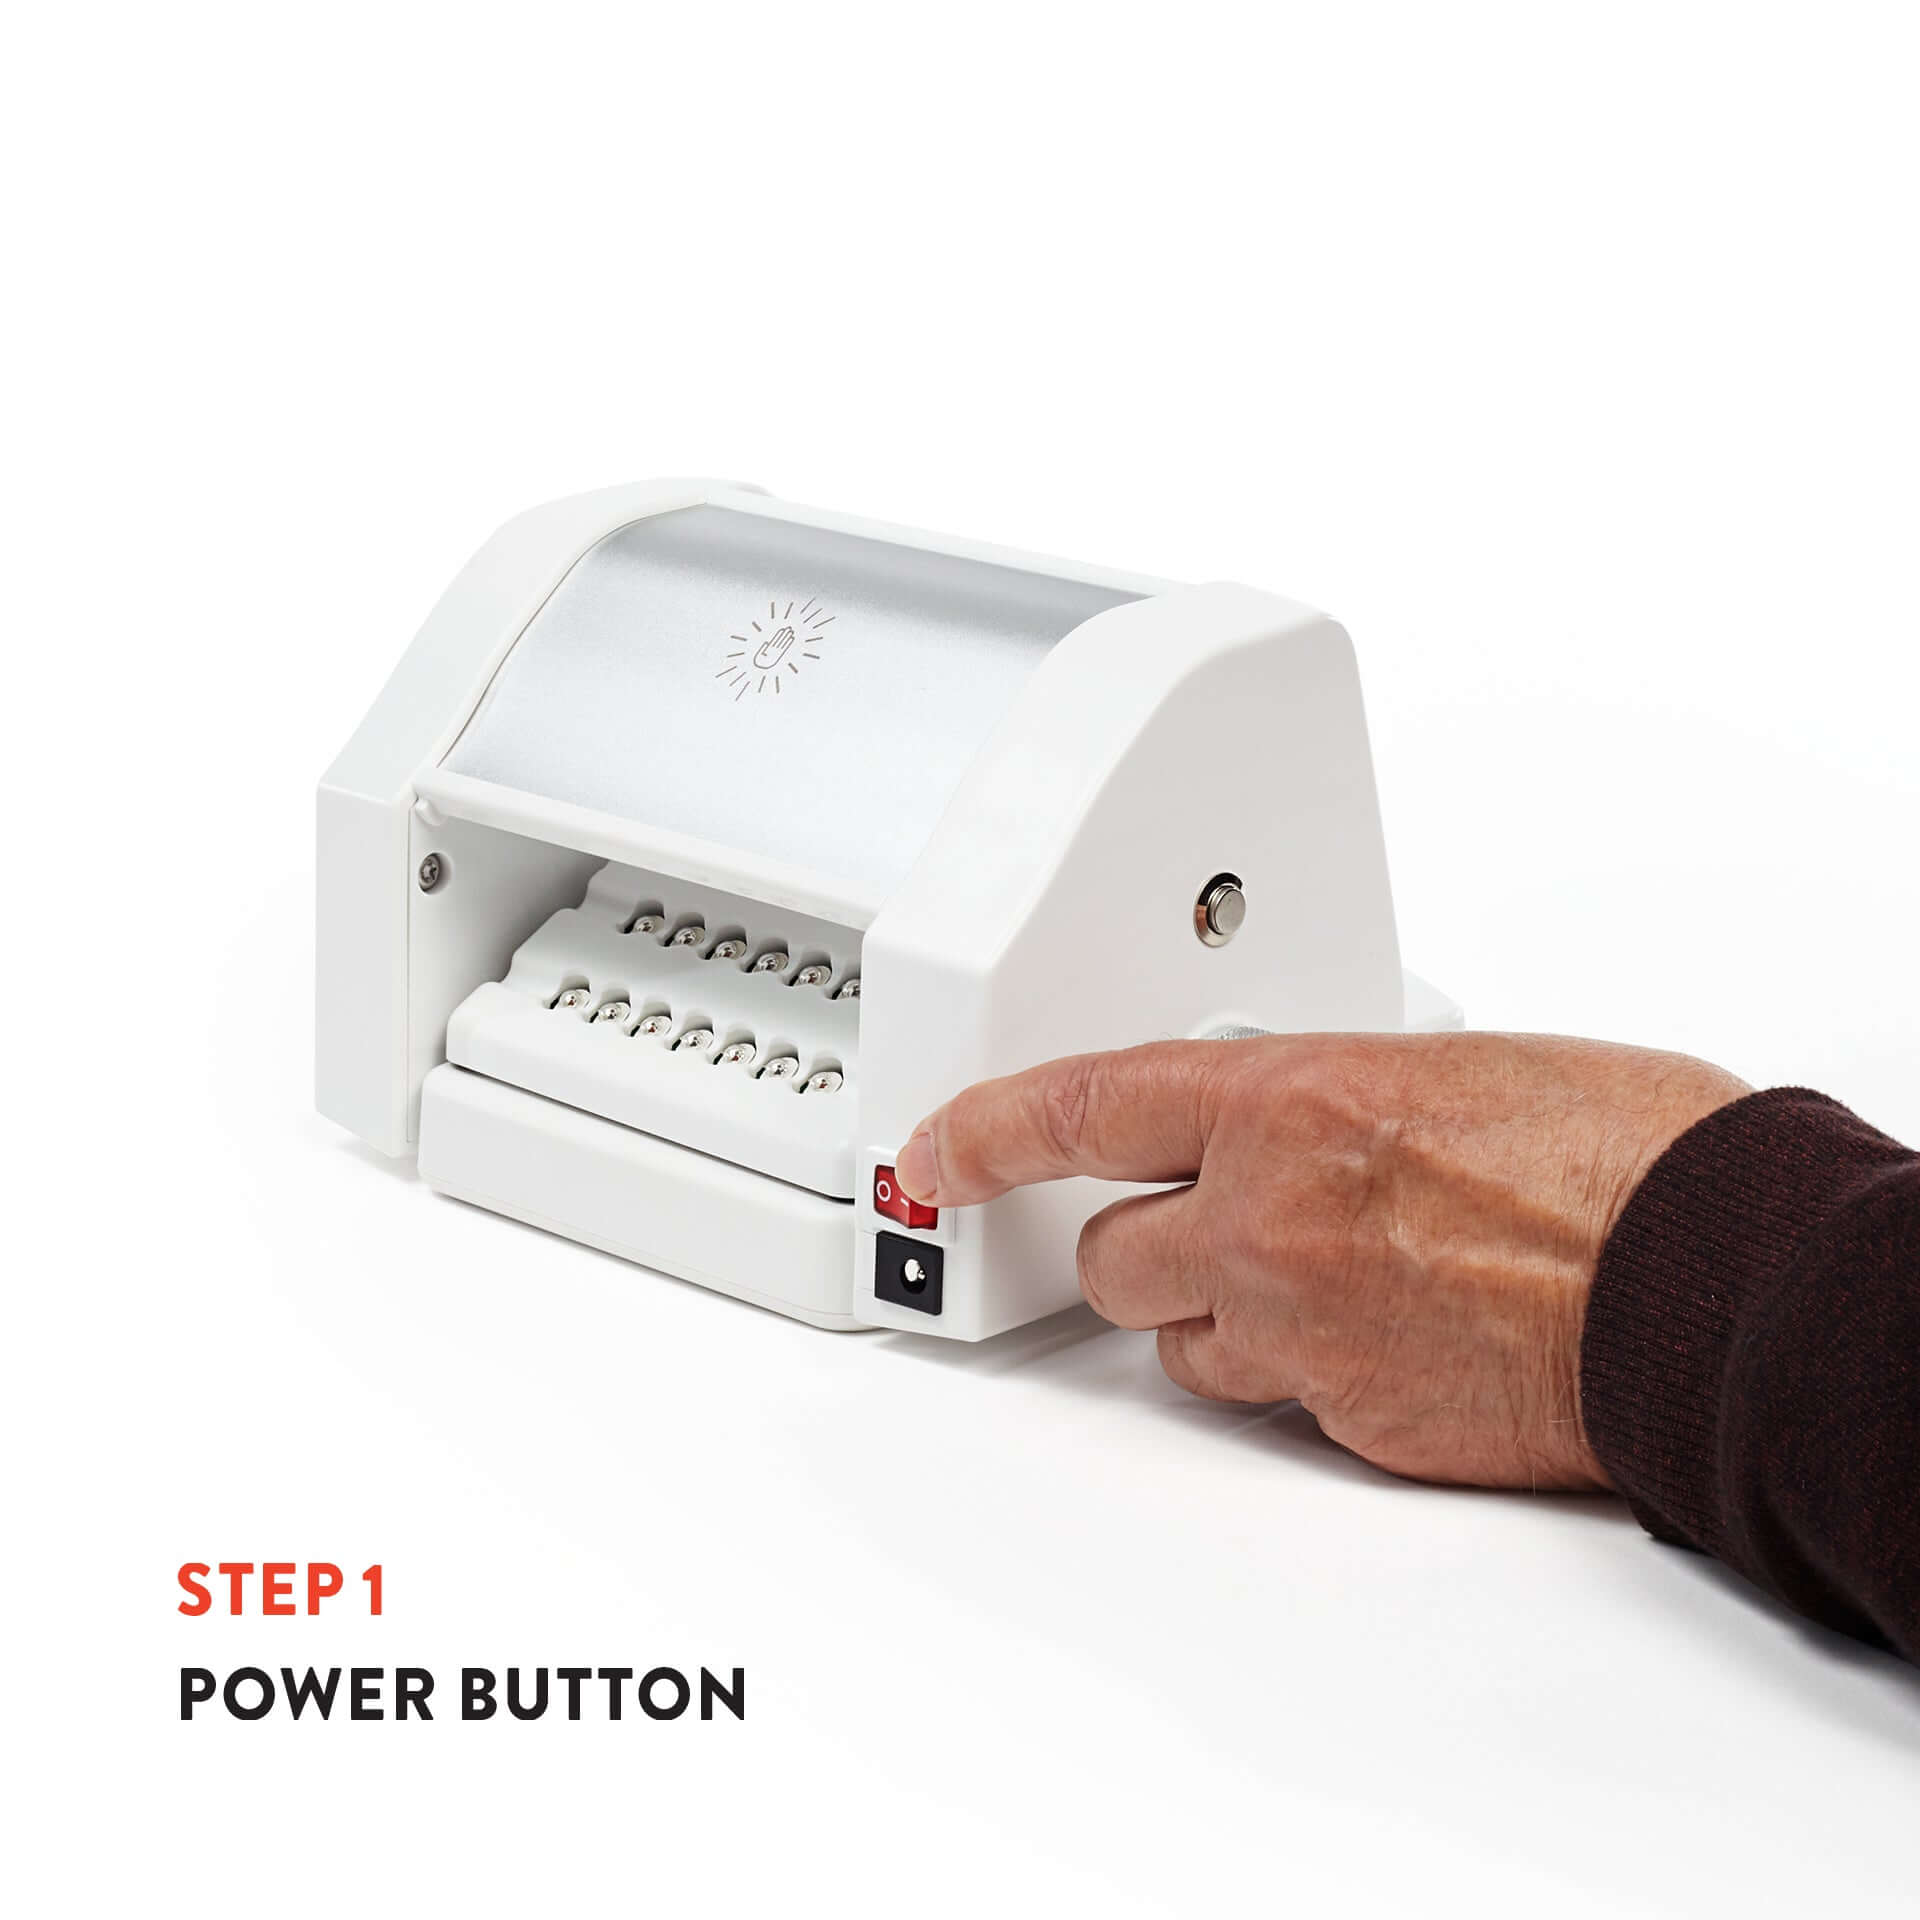 Power button on the Triumph Hand Therapy Device